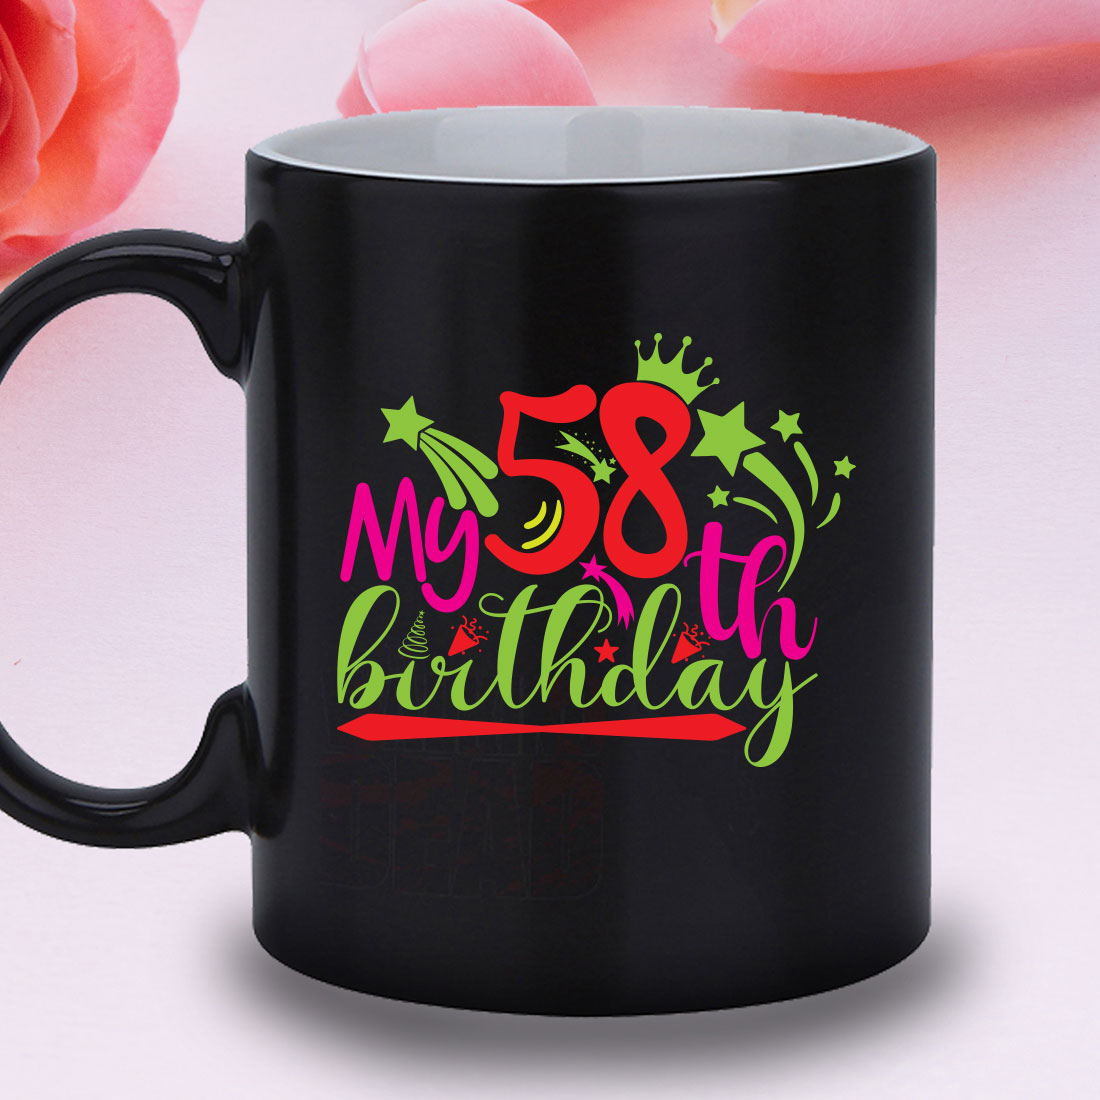 Black coffee mug with a pink rose in the background.